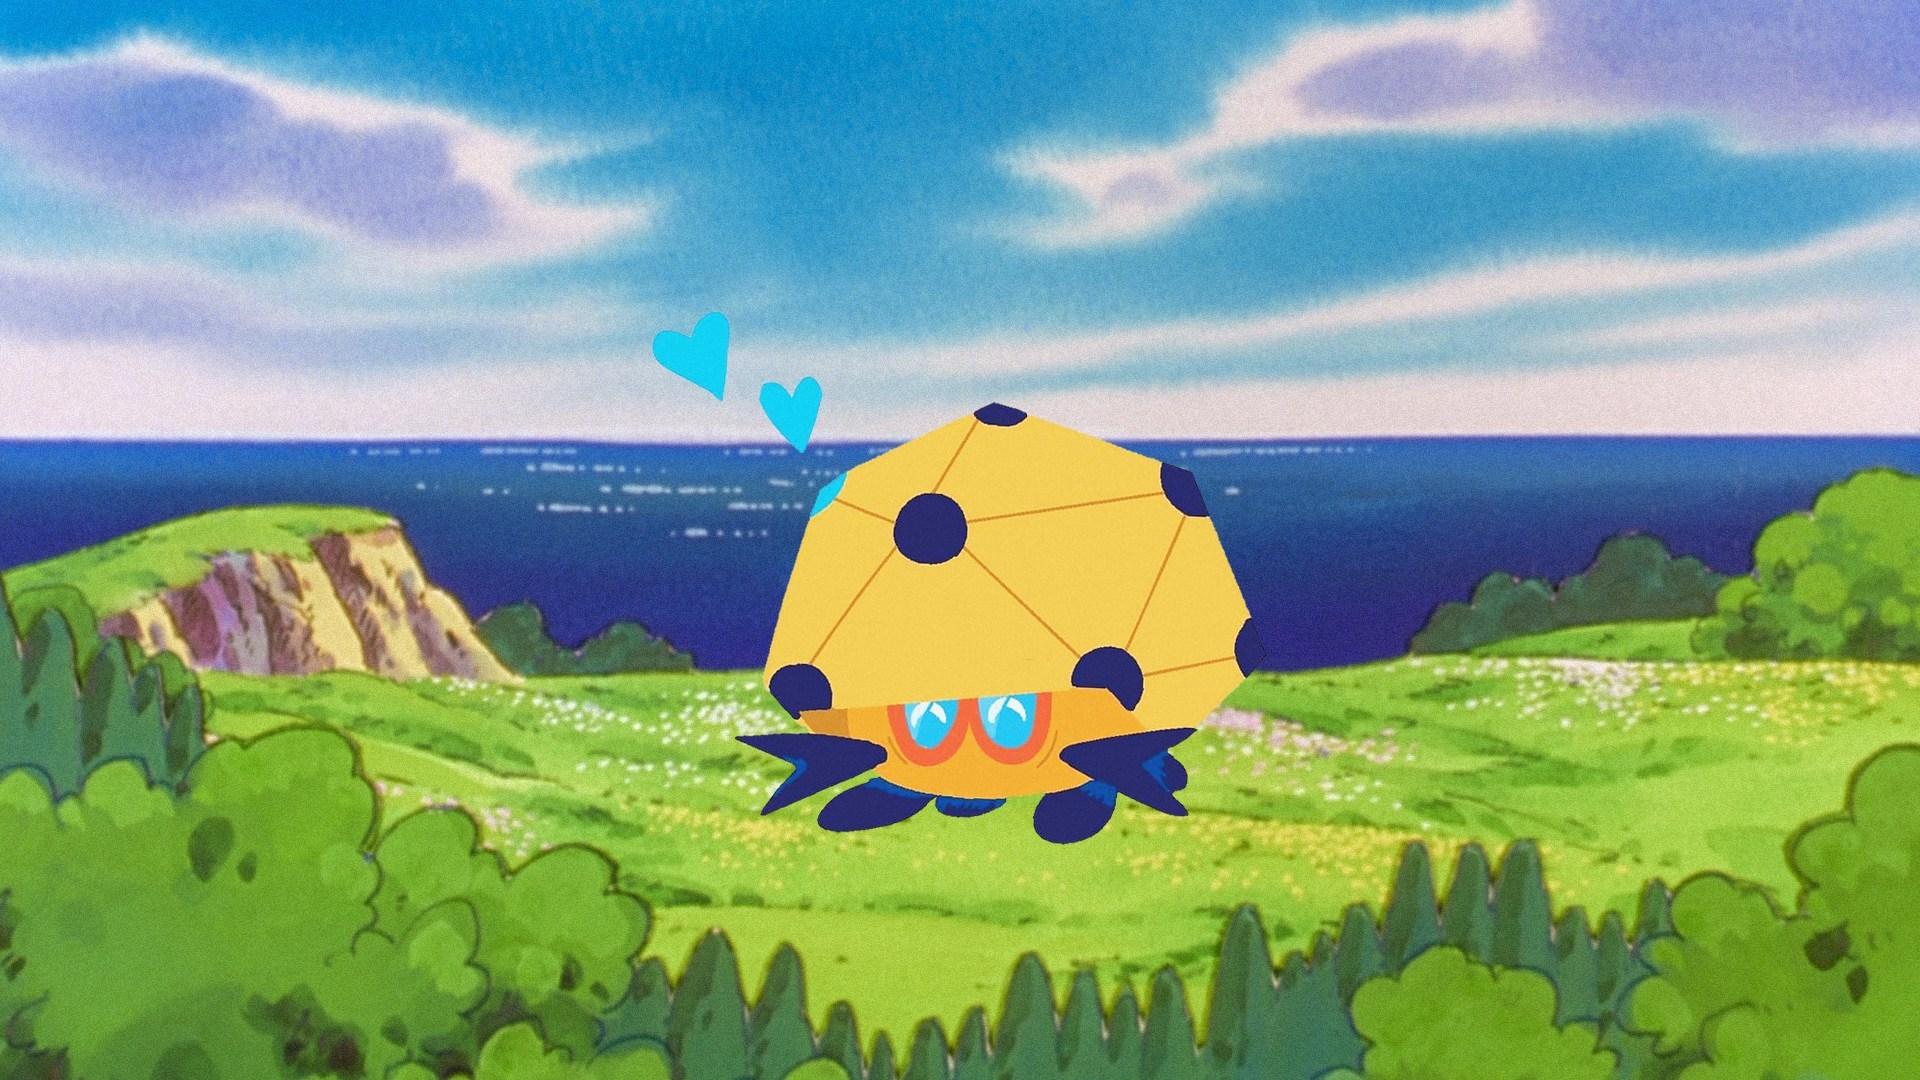 Dottler is my new spirit Pokémon, you can put this one on my